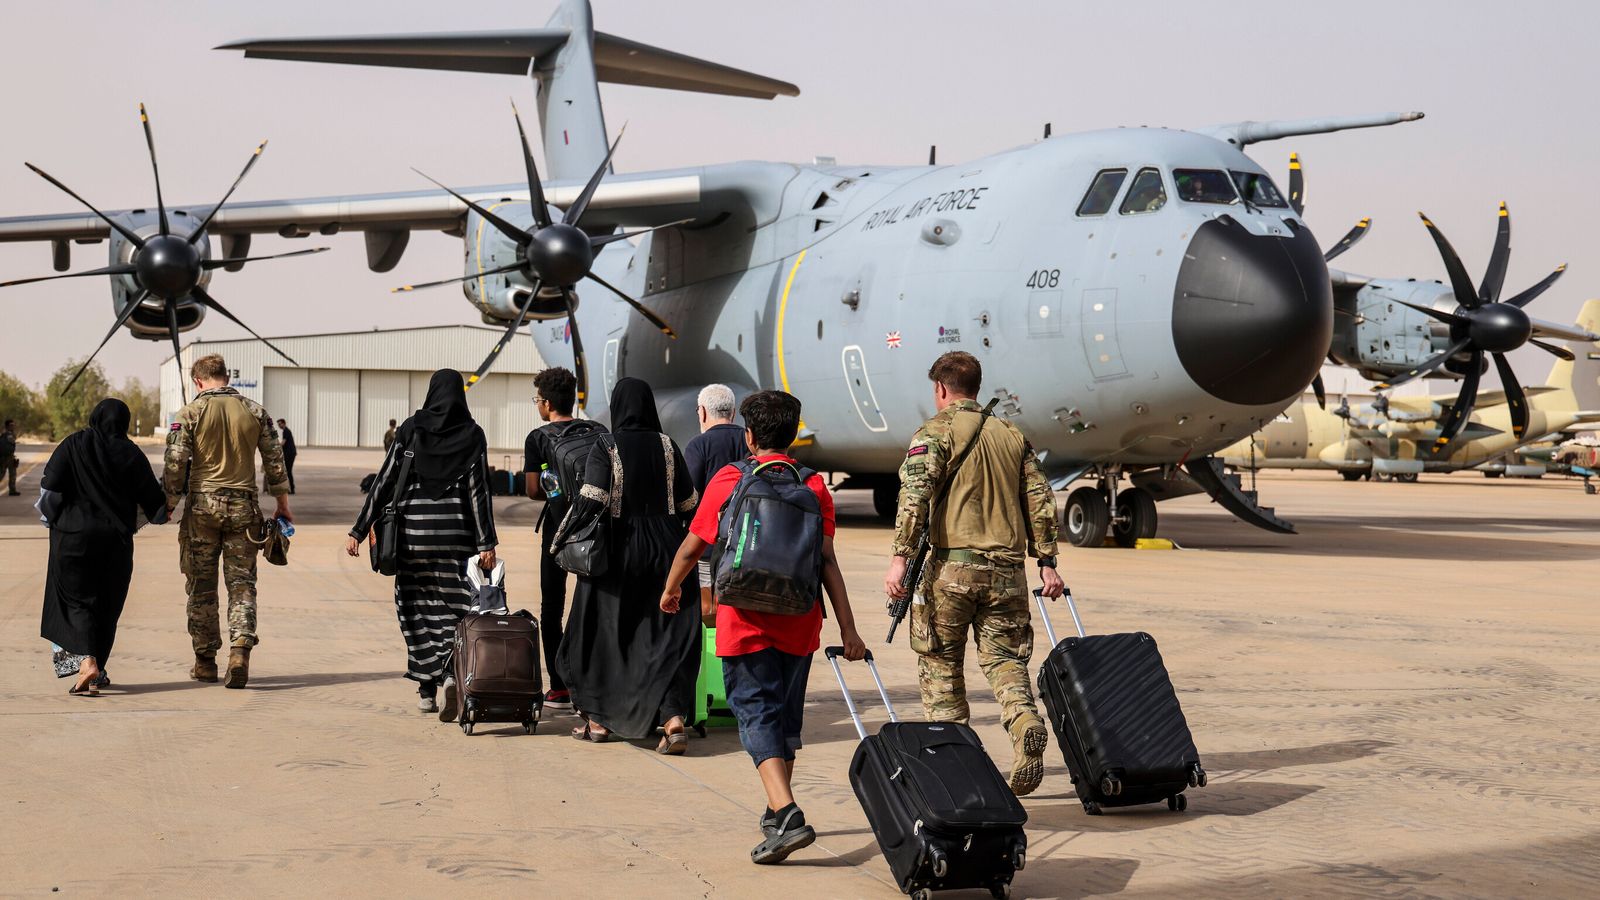 Sudan: British nationals have until midday to catch an evacuation flight, says deputy PM